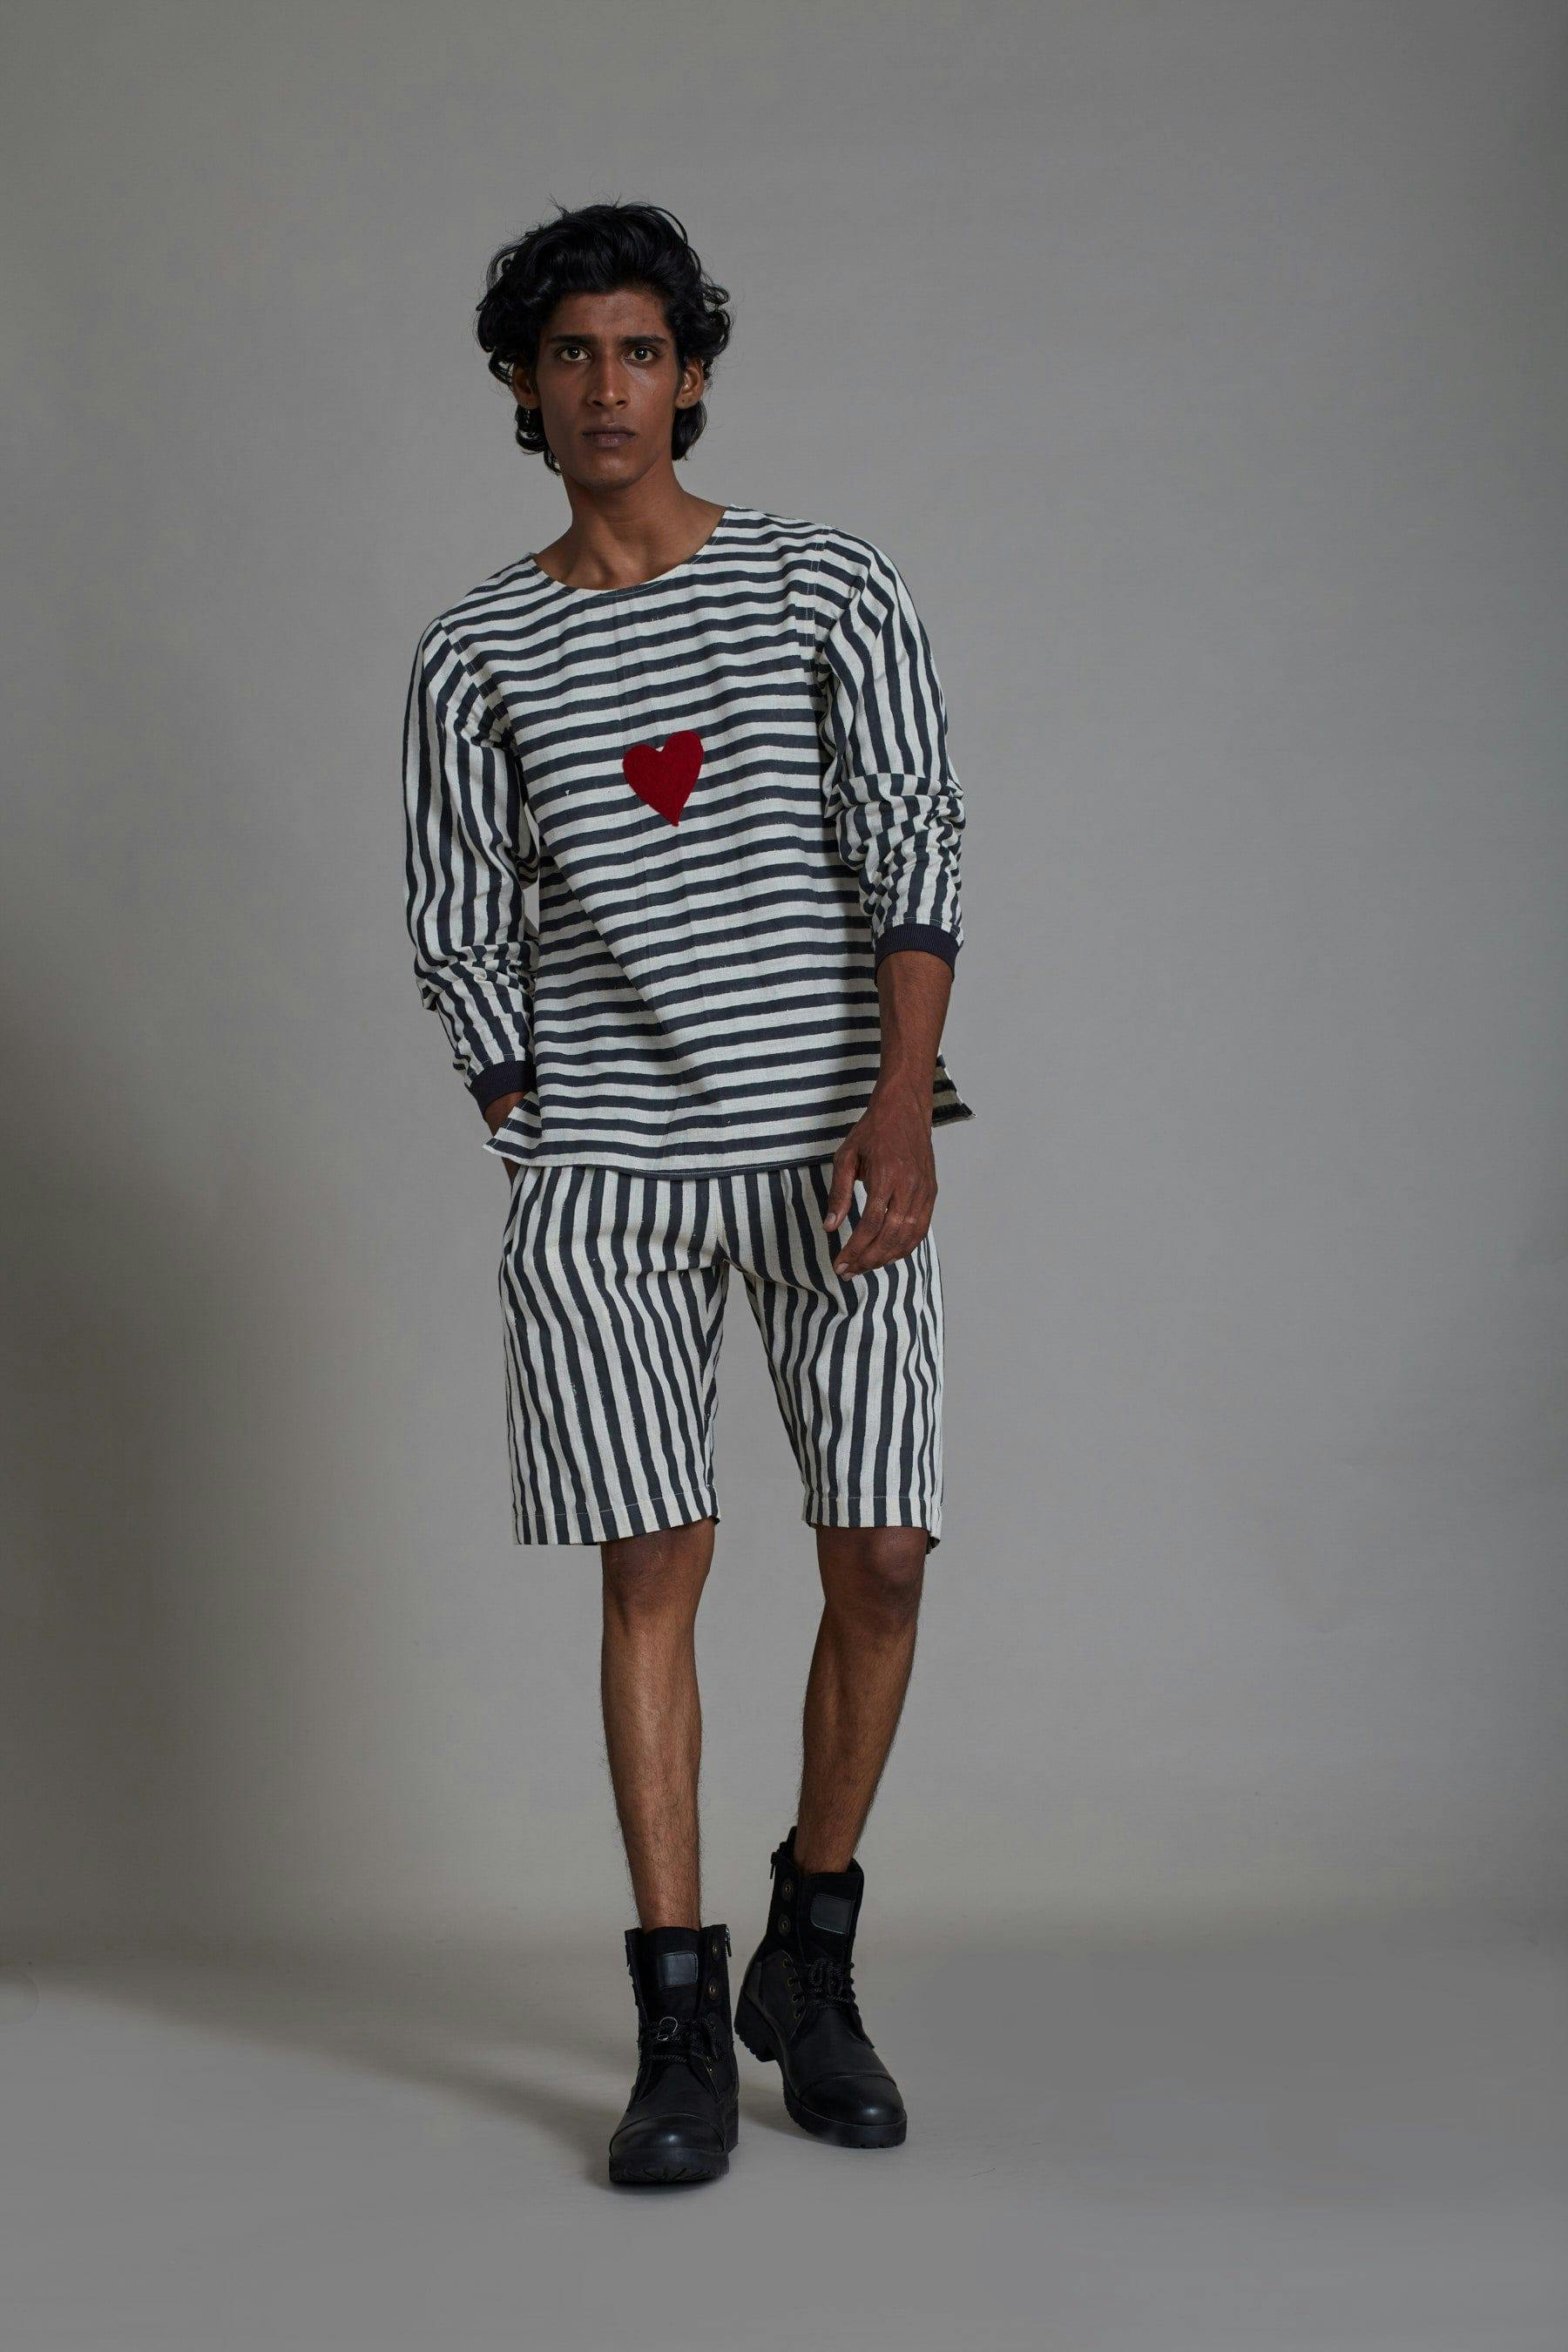 Black Stripe Shorts, a product by Style Mati